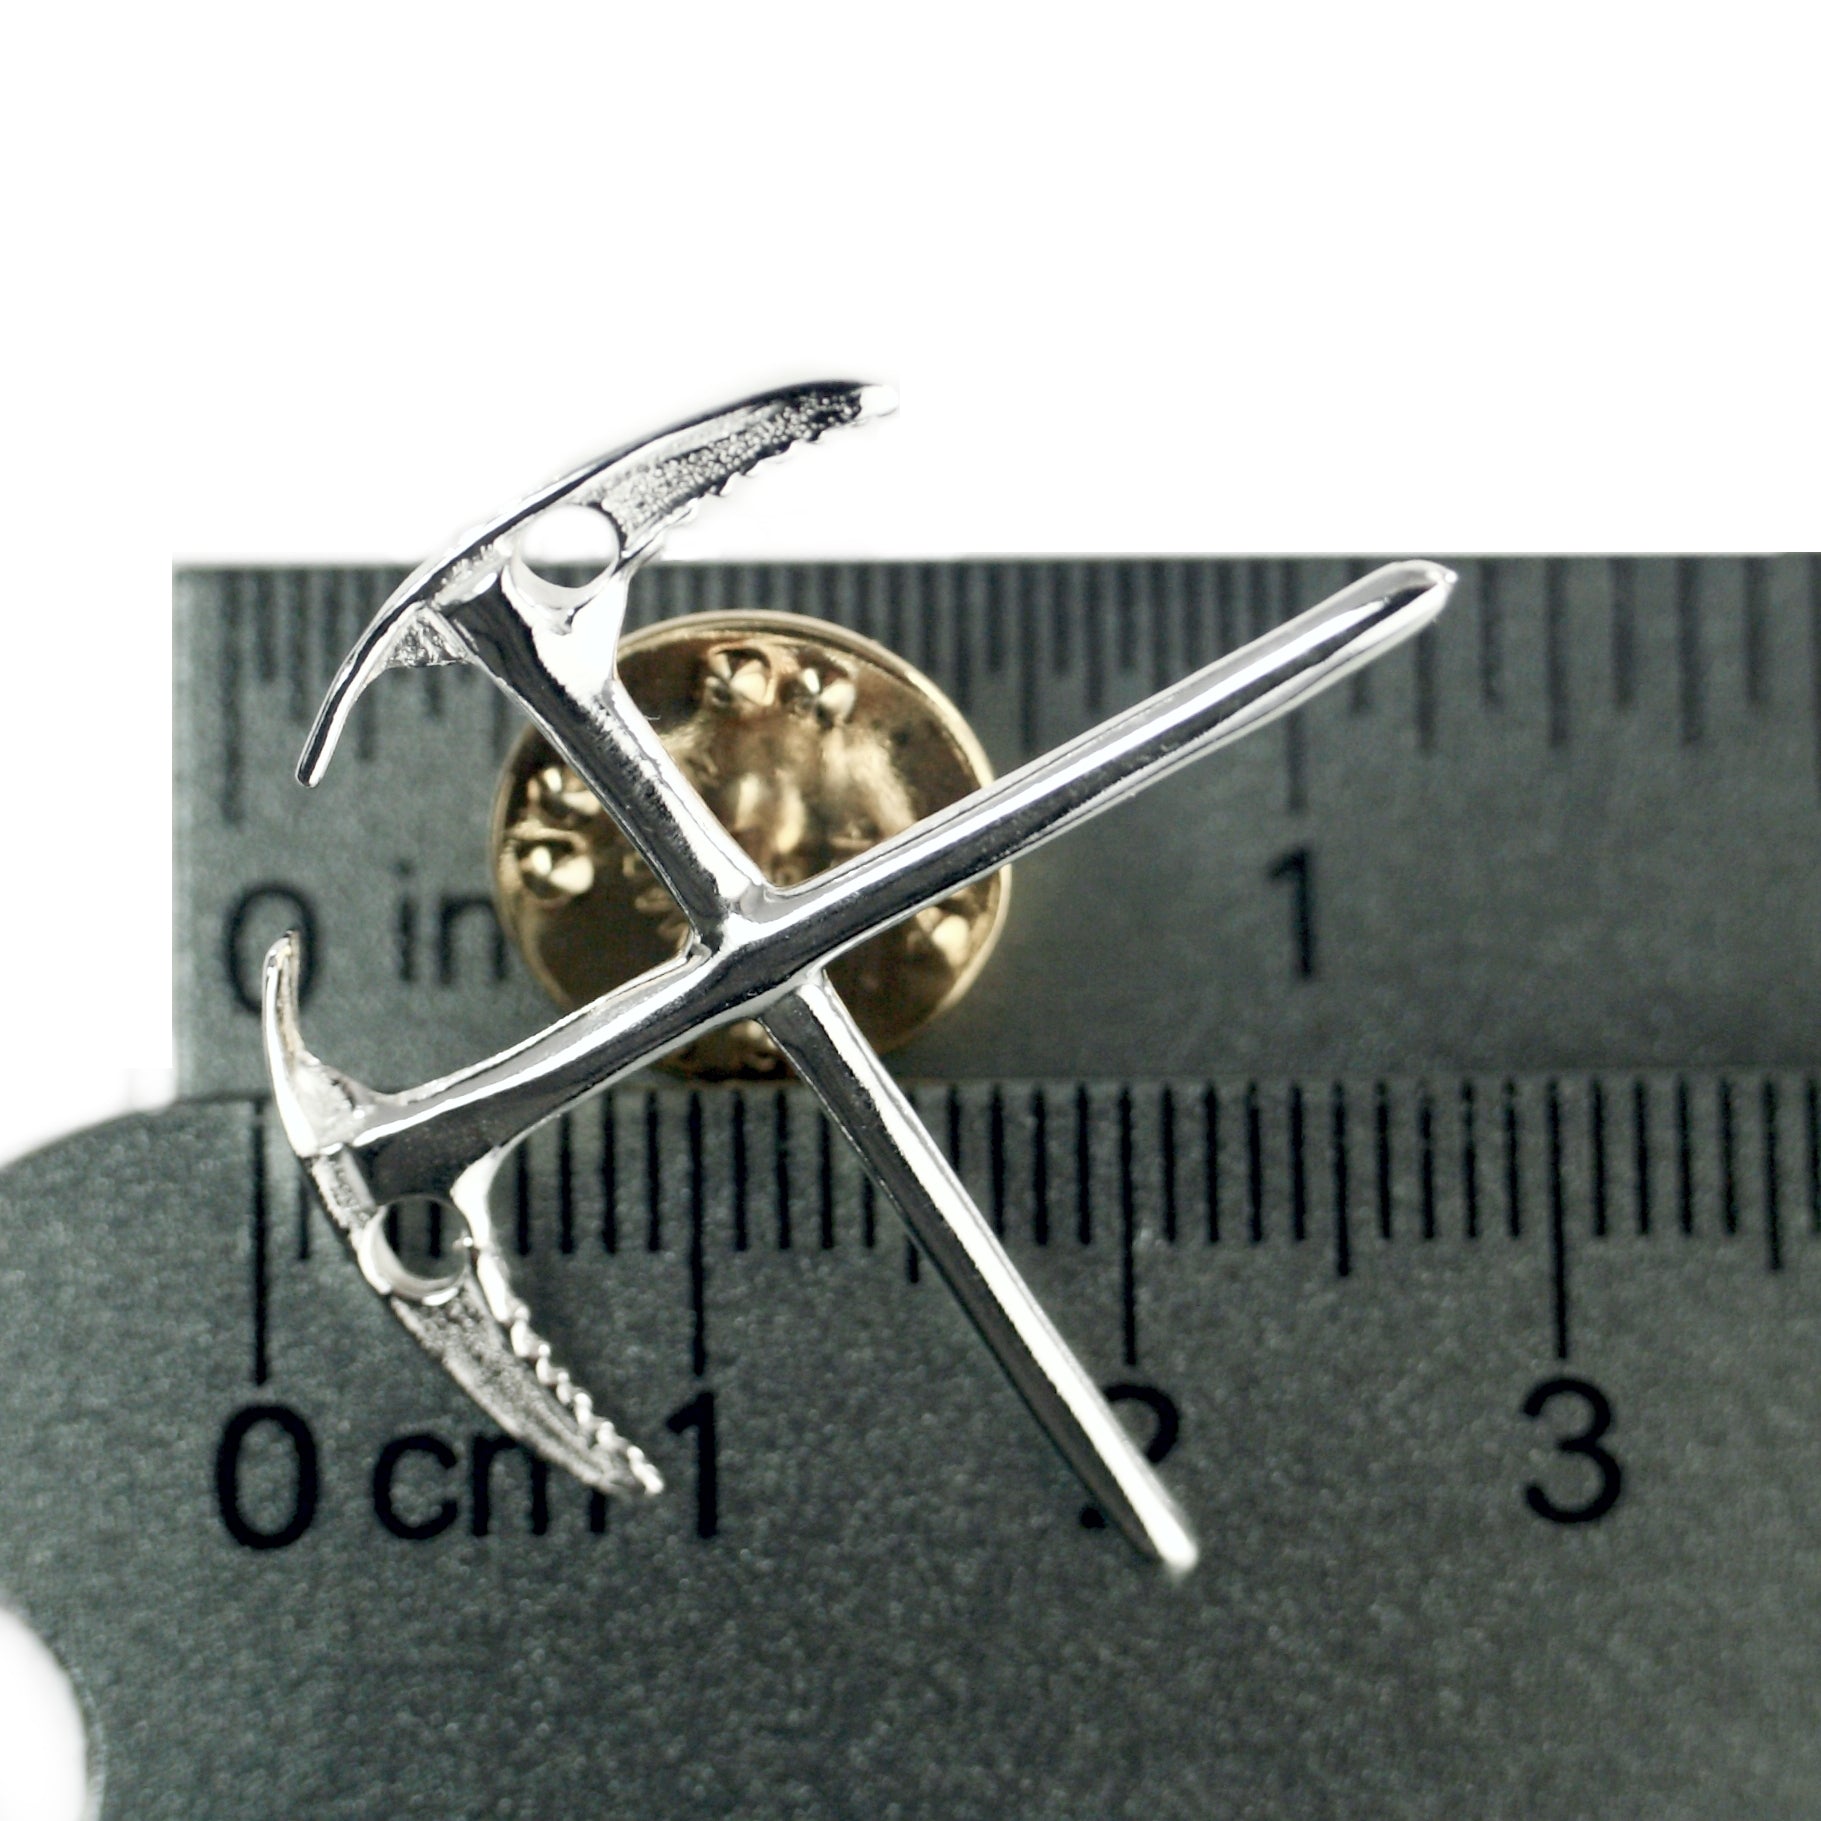 climbers crossed ice axe lapel pin sterling silver - measurements